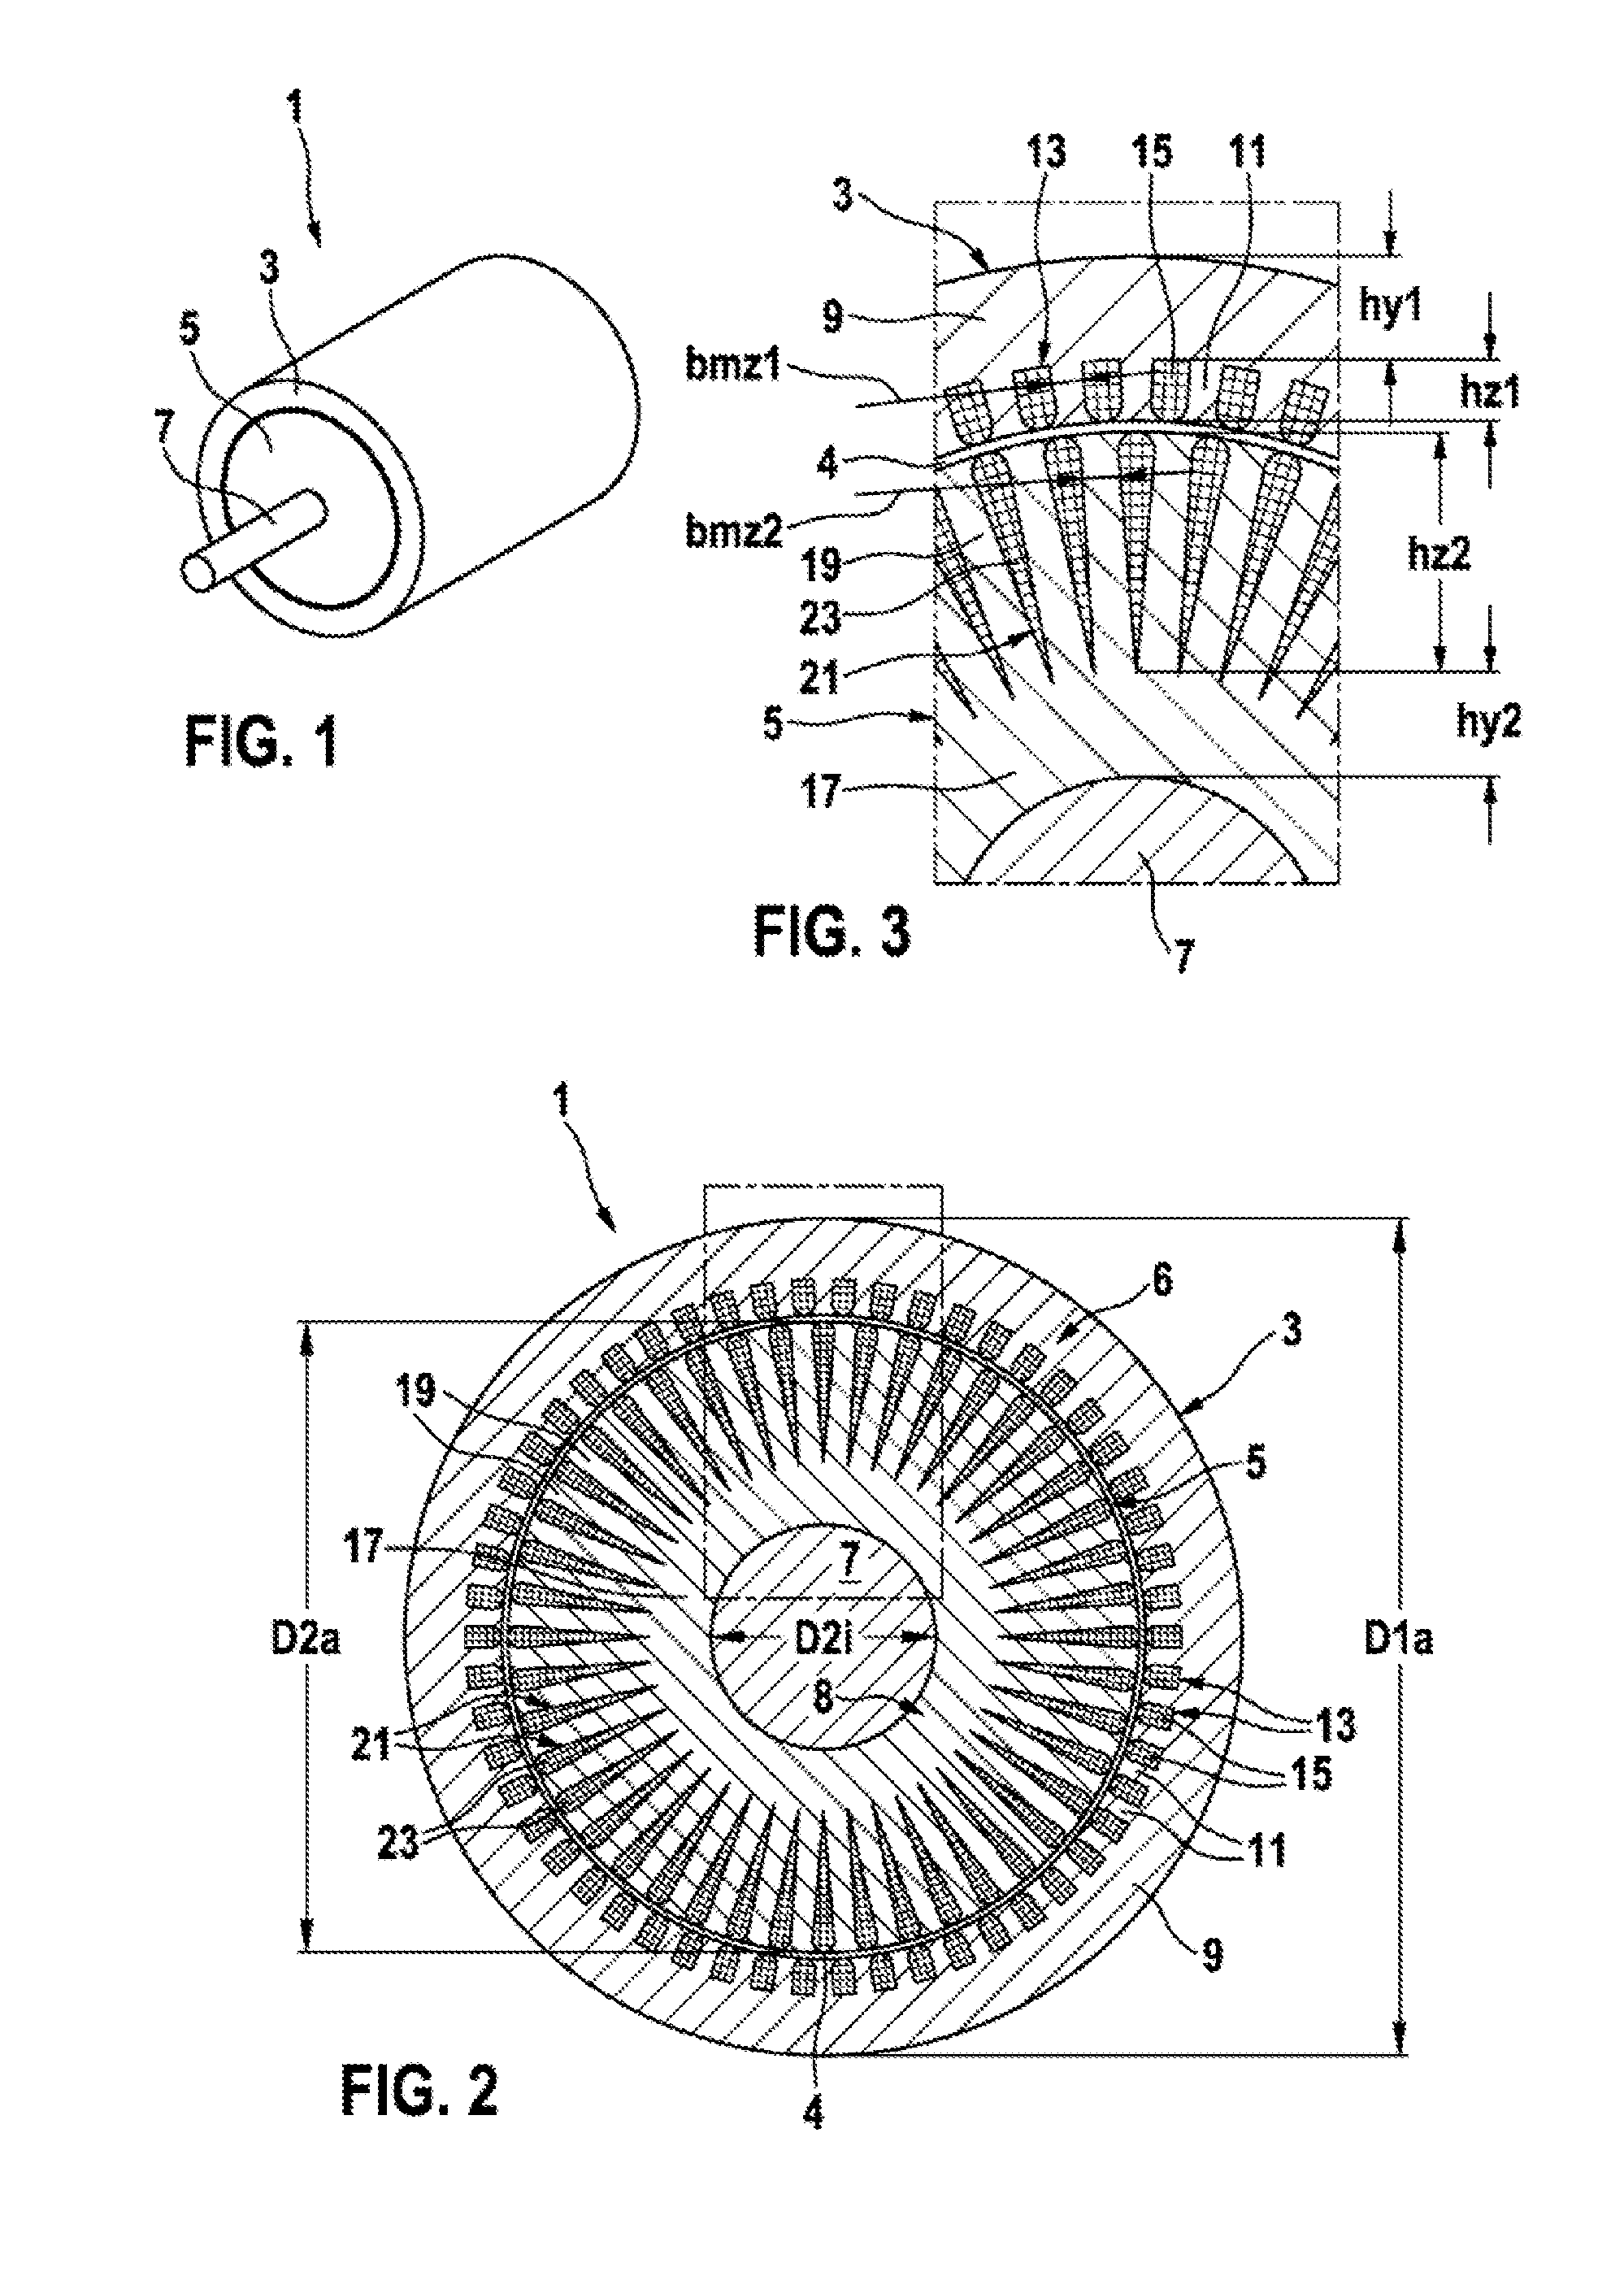 Asynchronous machine with optimized distribution of electrical losses between stator and rotor